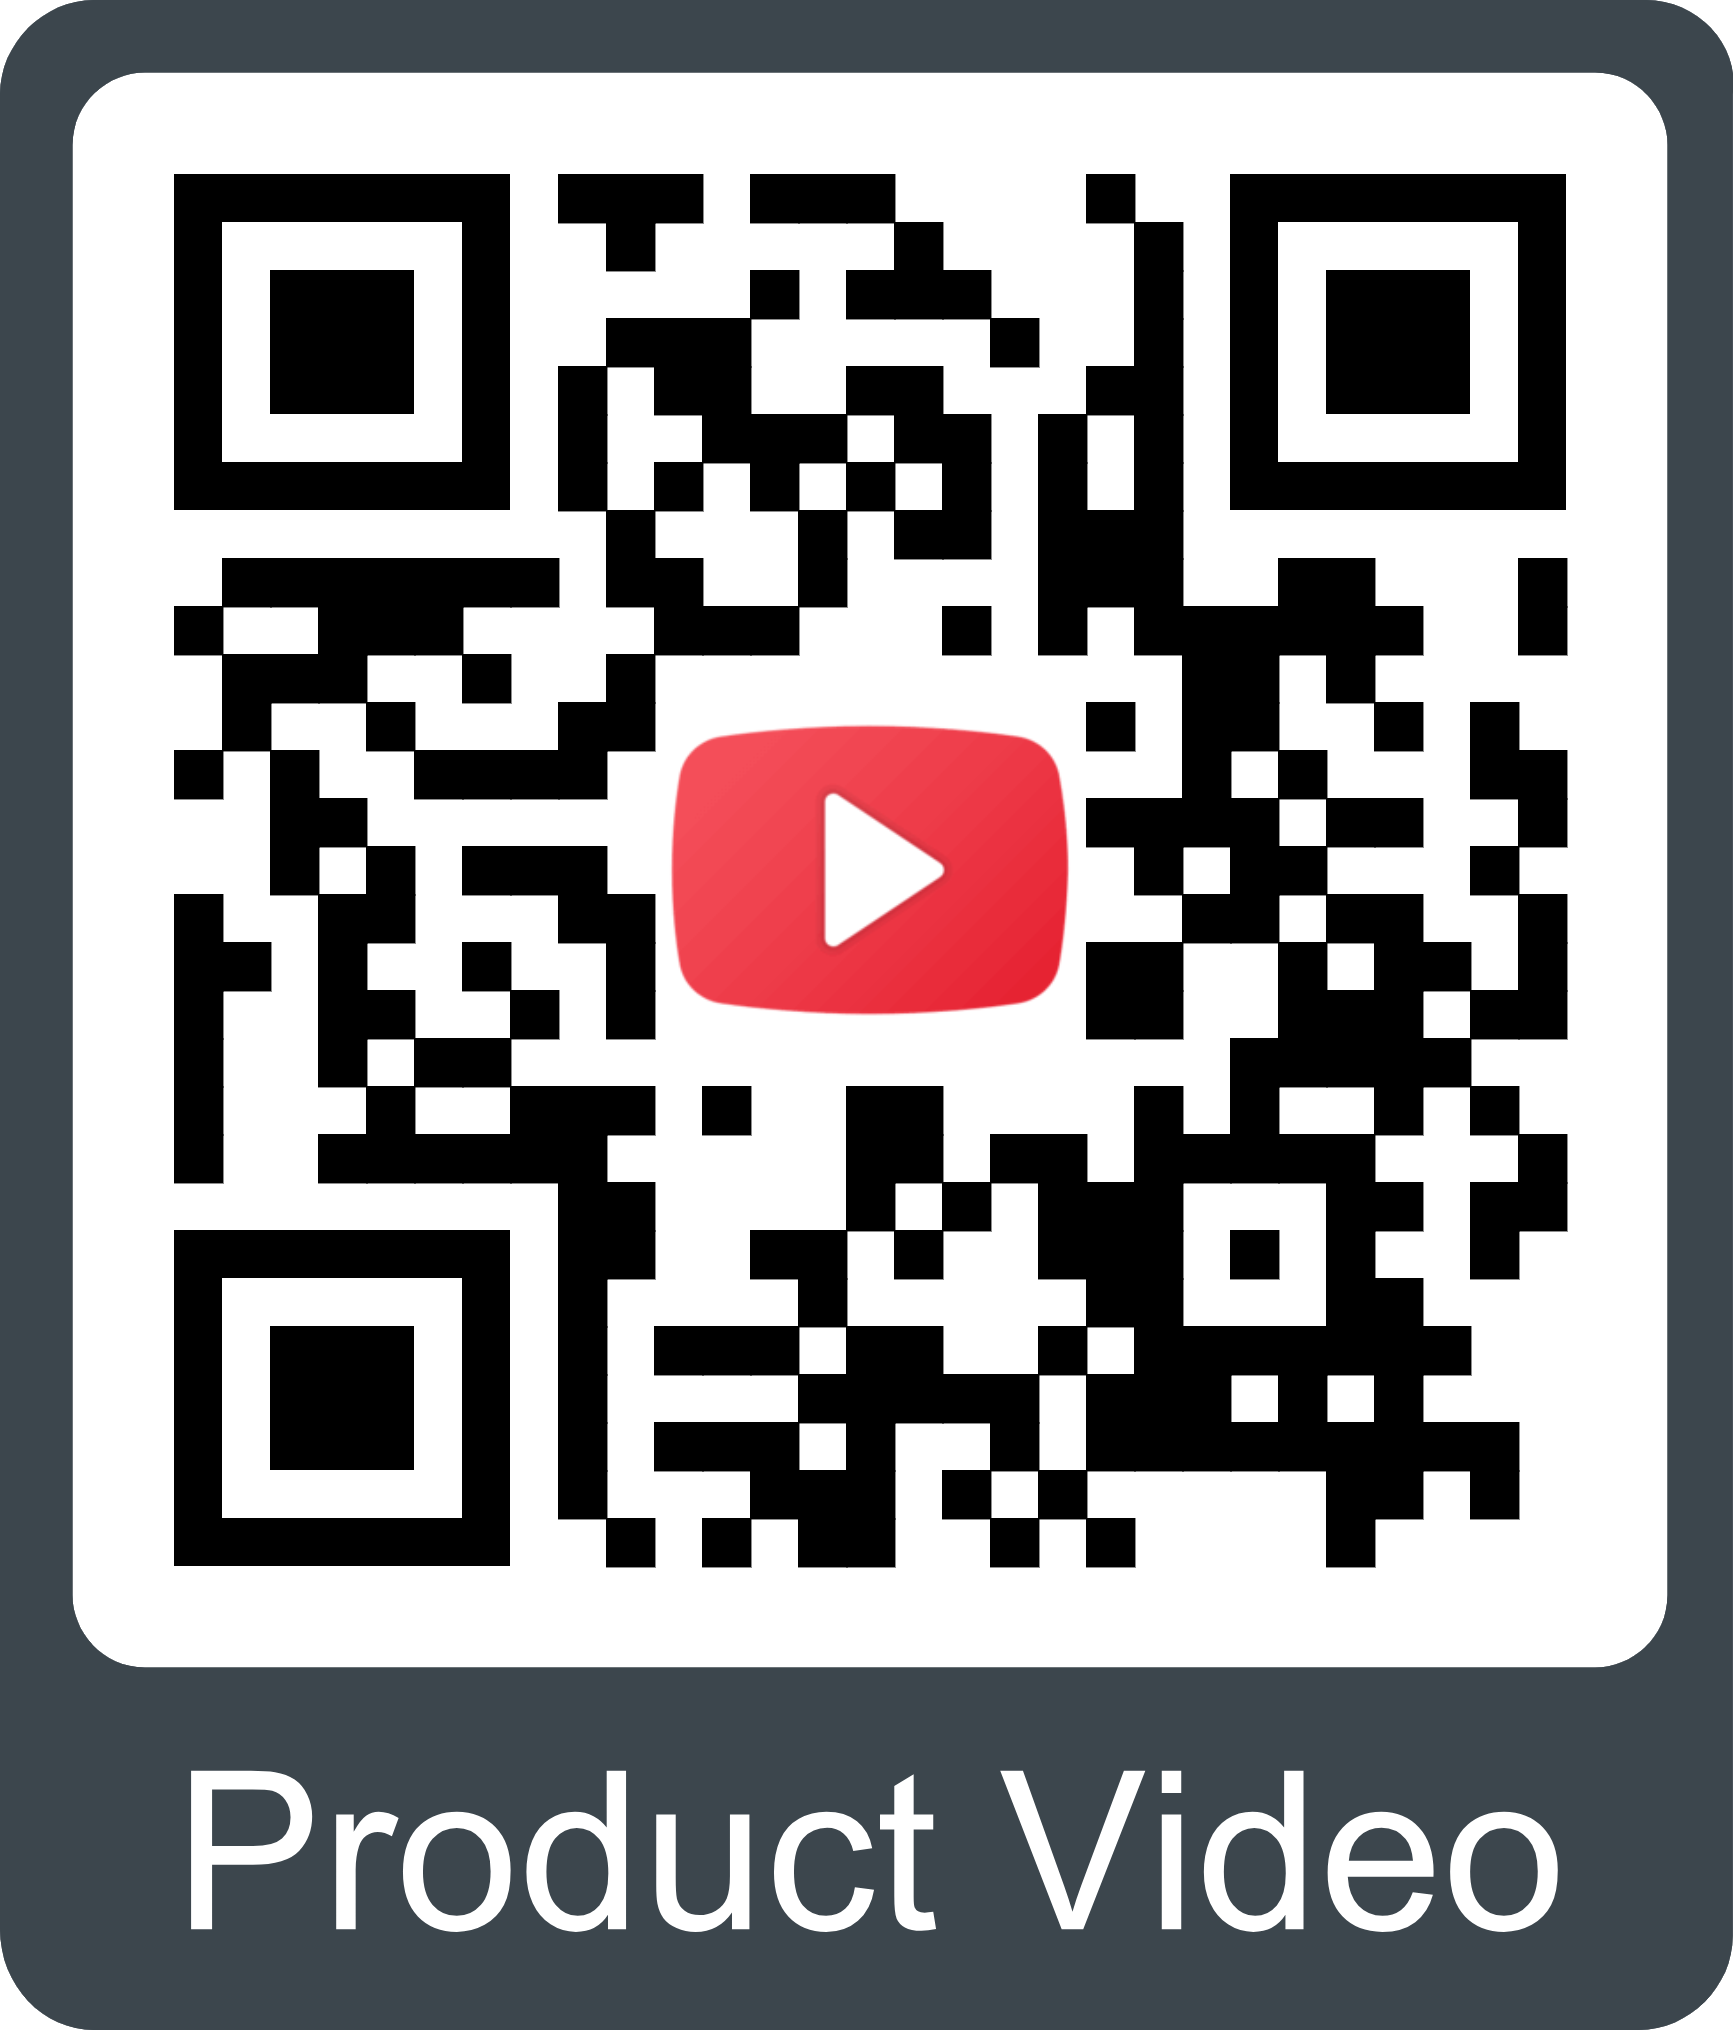 QR code to play video